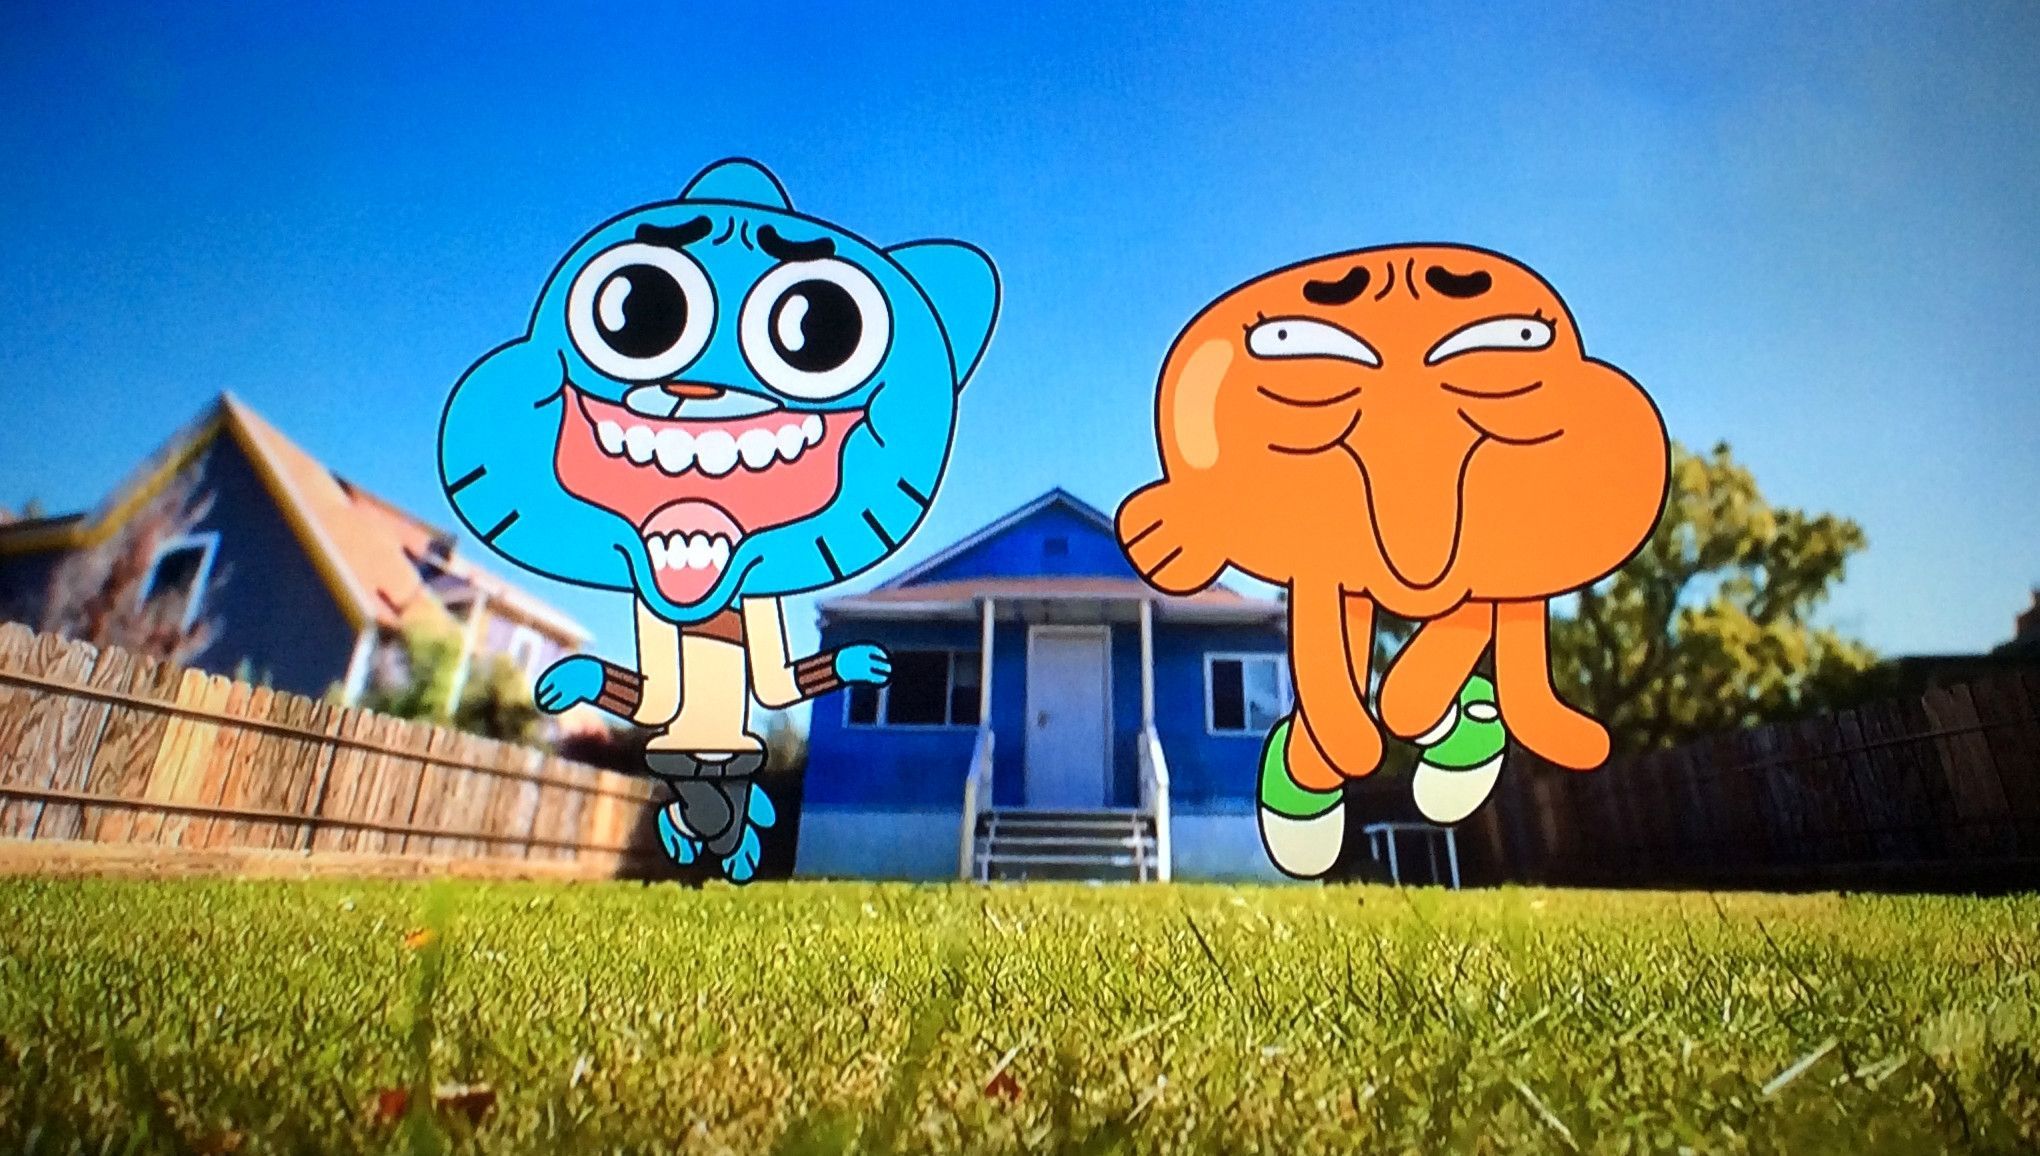 The Amazing World Of Gumball Wallpaper 81 Image inside The Amazing World Of Gumball Deskt. The amazing world of gumball, World of gumball, Adventures of gumball